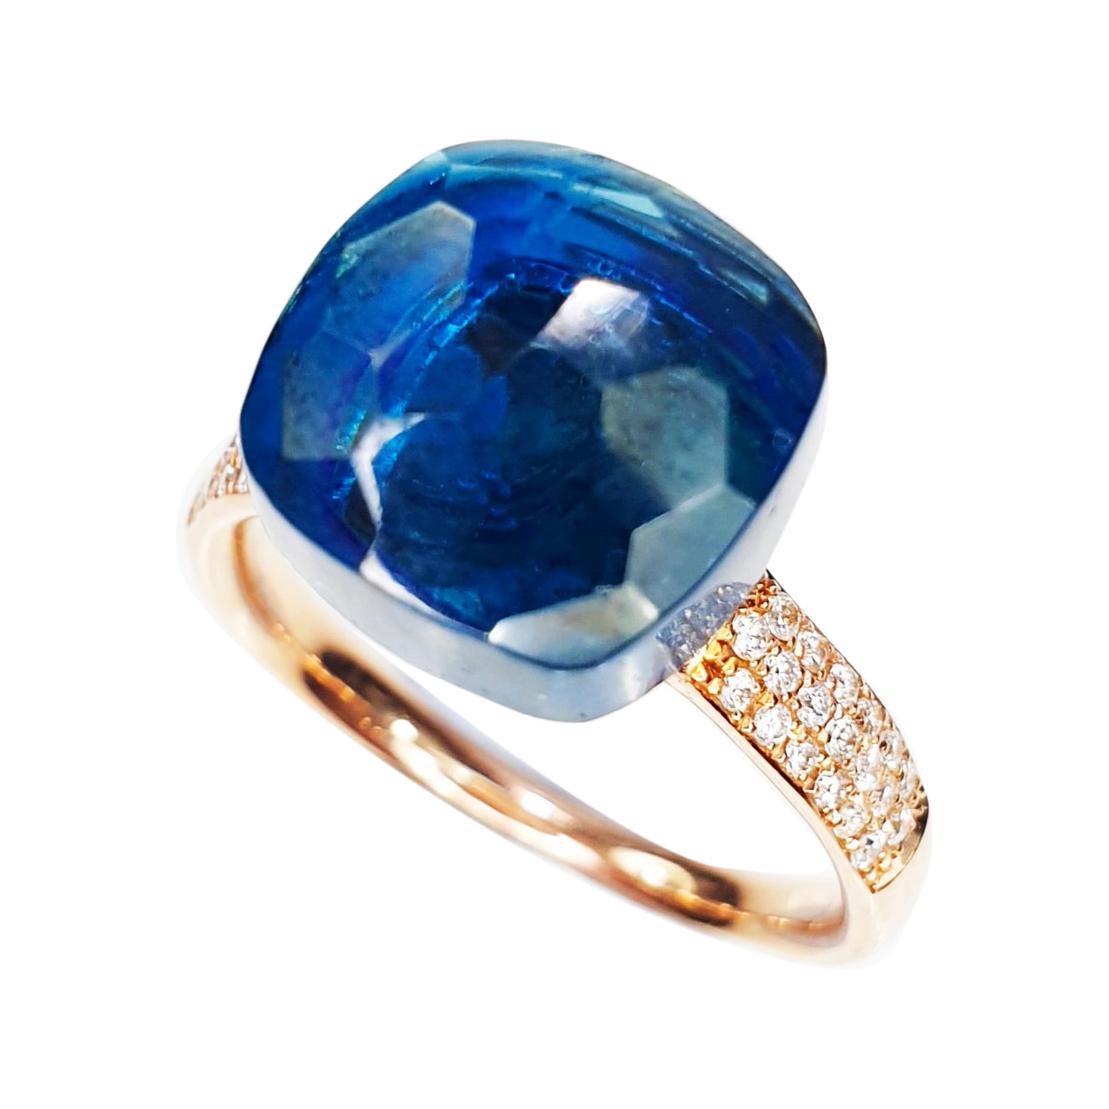 Multifaceted Medium Blue london topaz in 18k Rose Gold and Pavé of Diamonds Ring